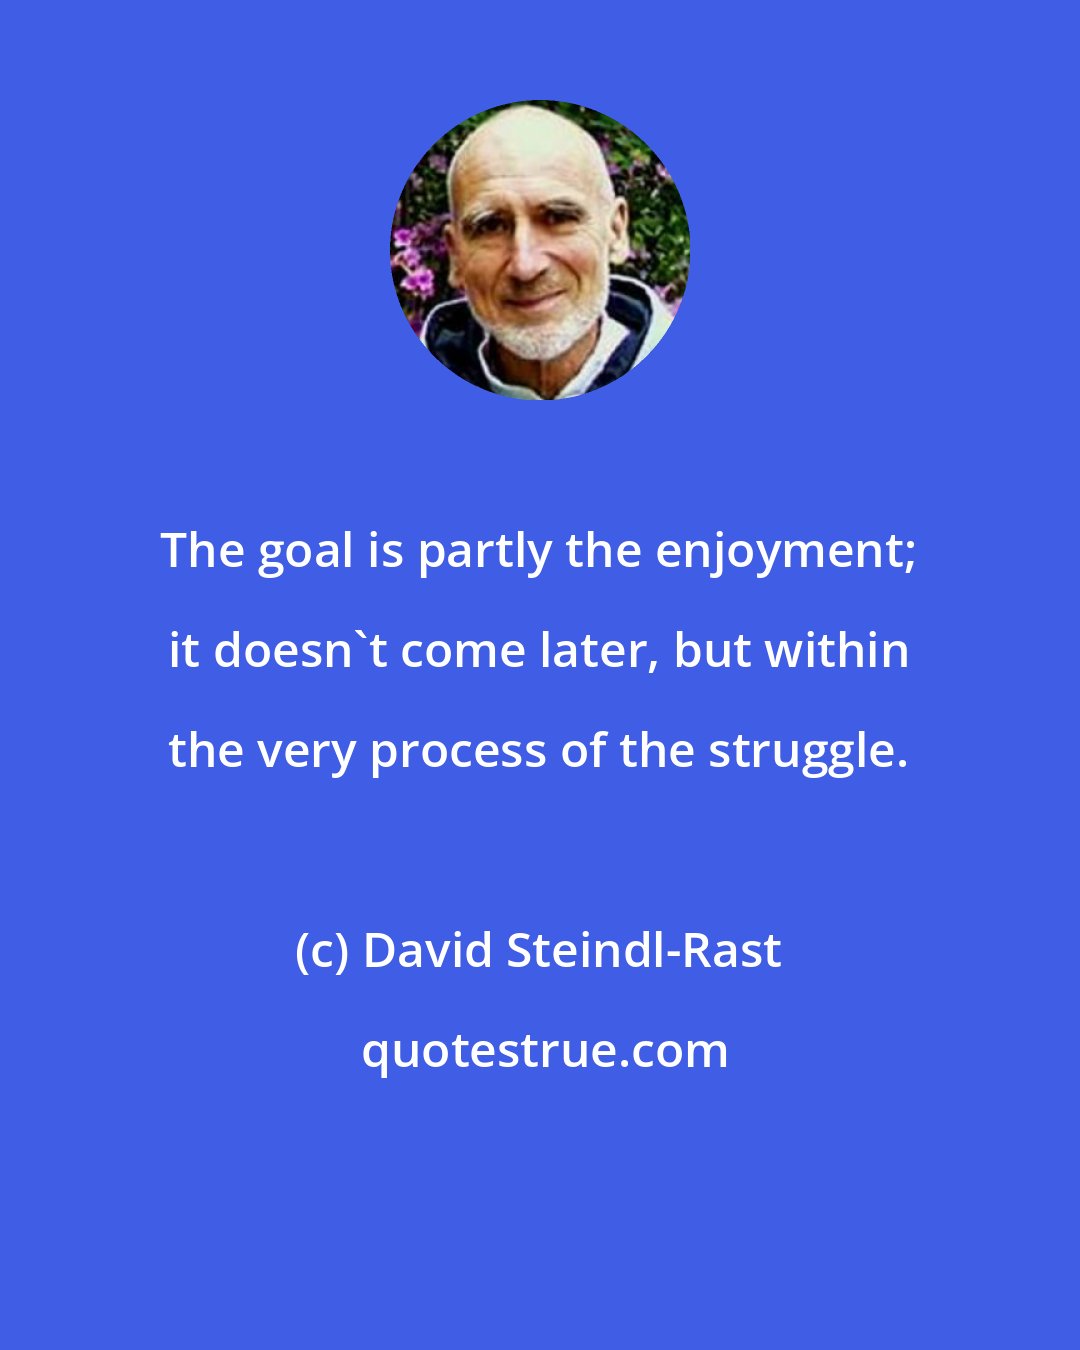 David Steindl-Rast: The goal is partly the enjoyment; it doesn't come later, but within the very process of the struggle.